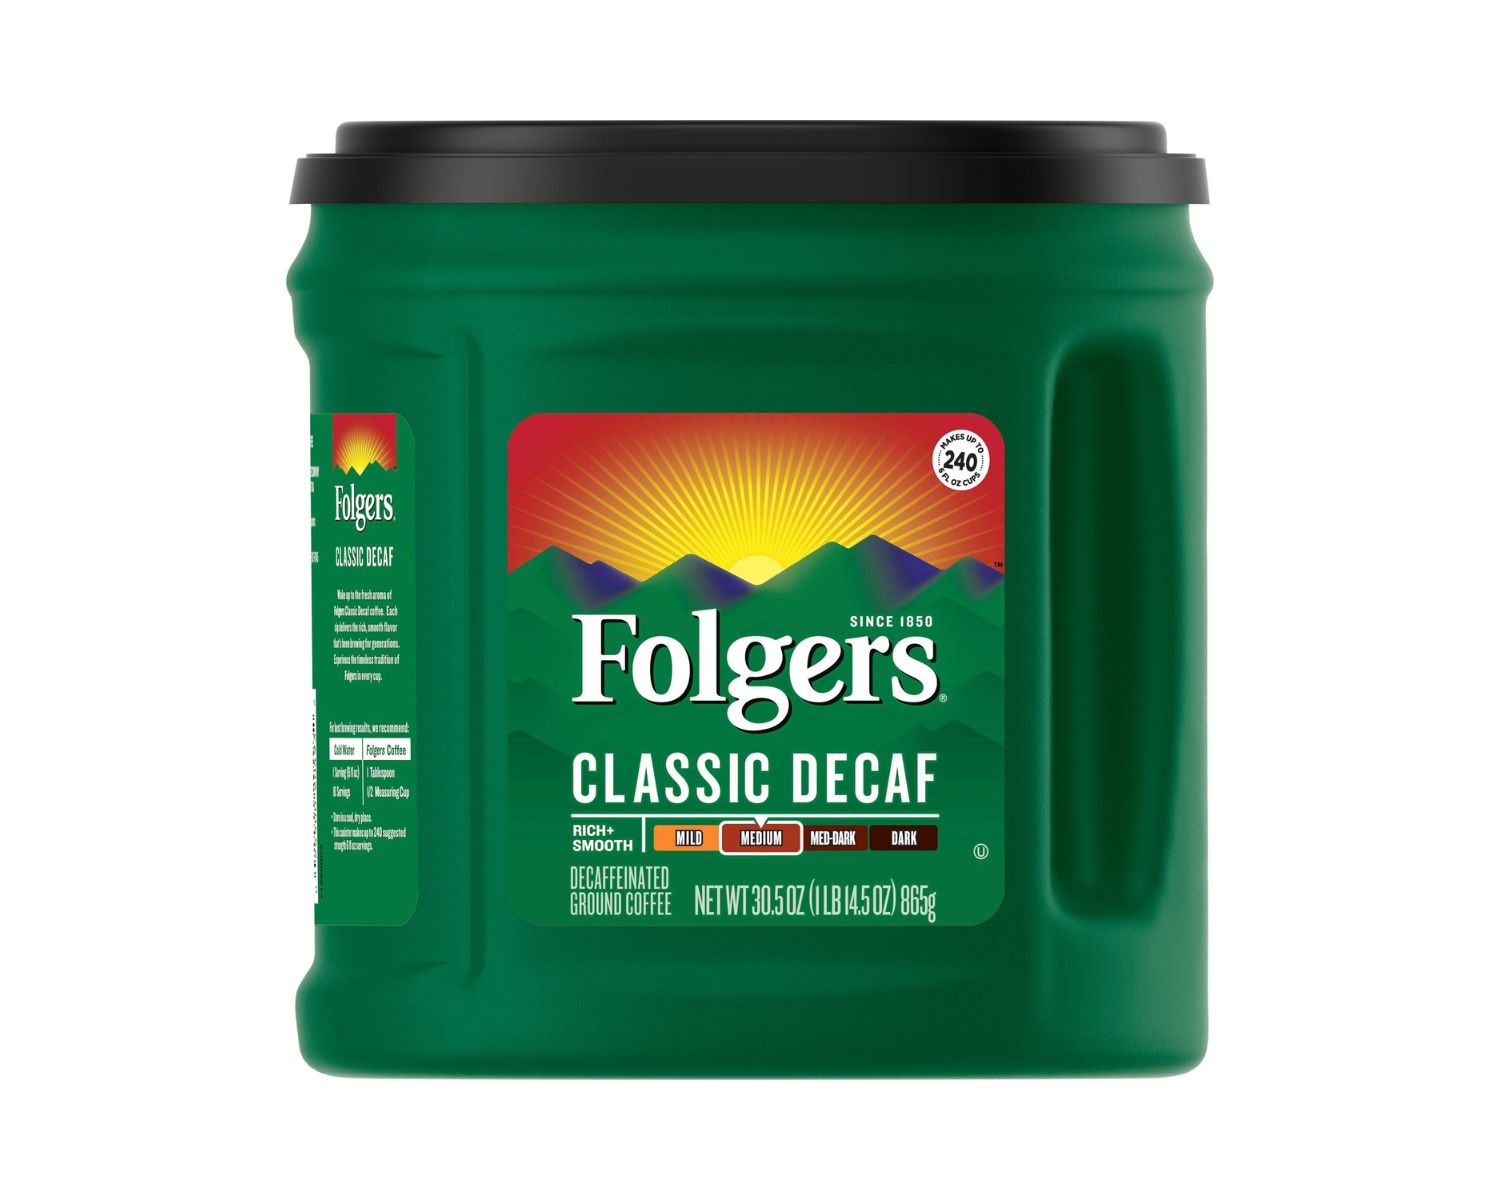 19-folgers-decaf-coffee-nutrition-facts